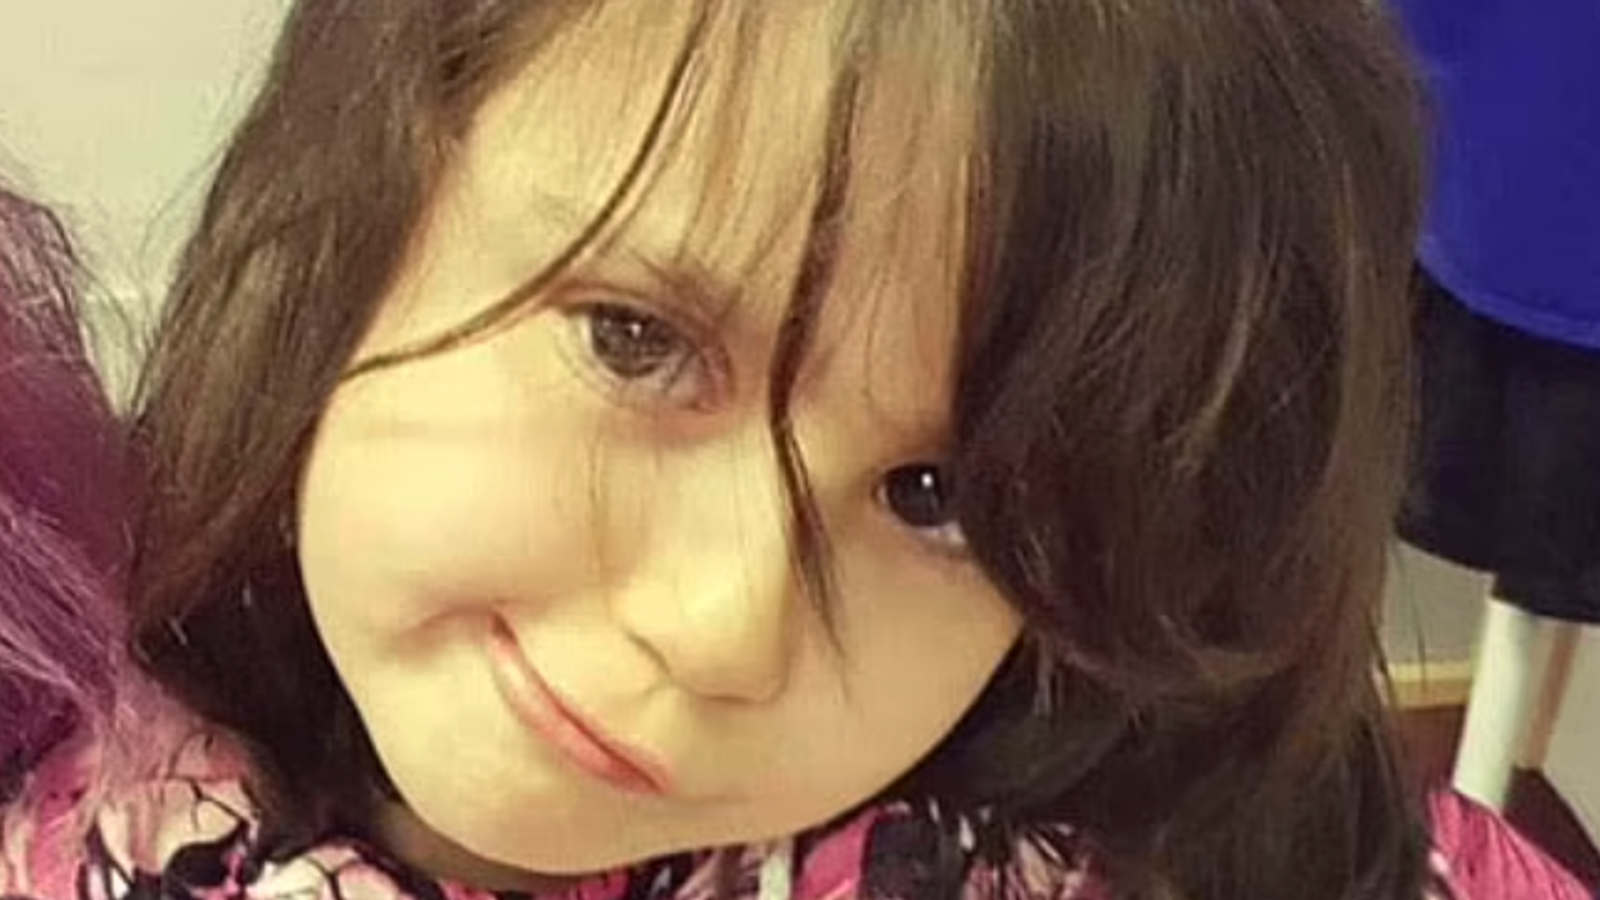 Sara Sharif: Five children who travelled to Pakistan with their father taken into care